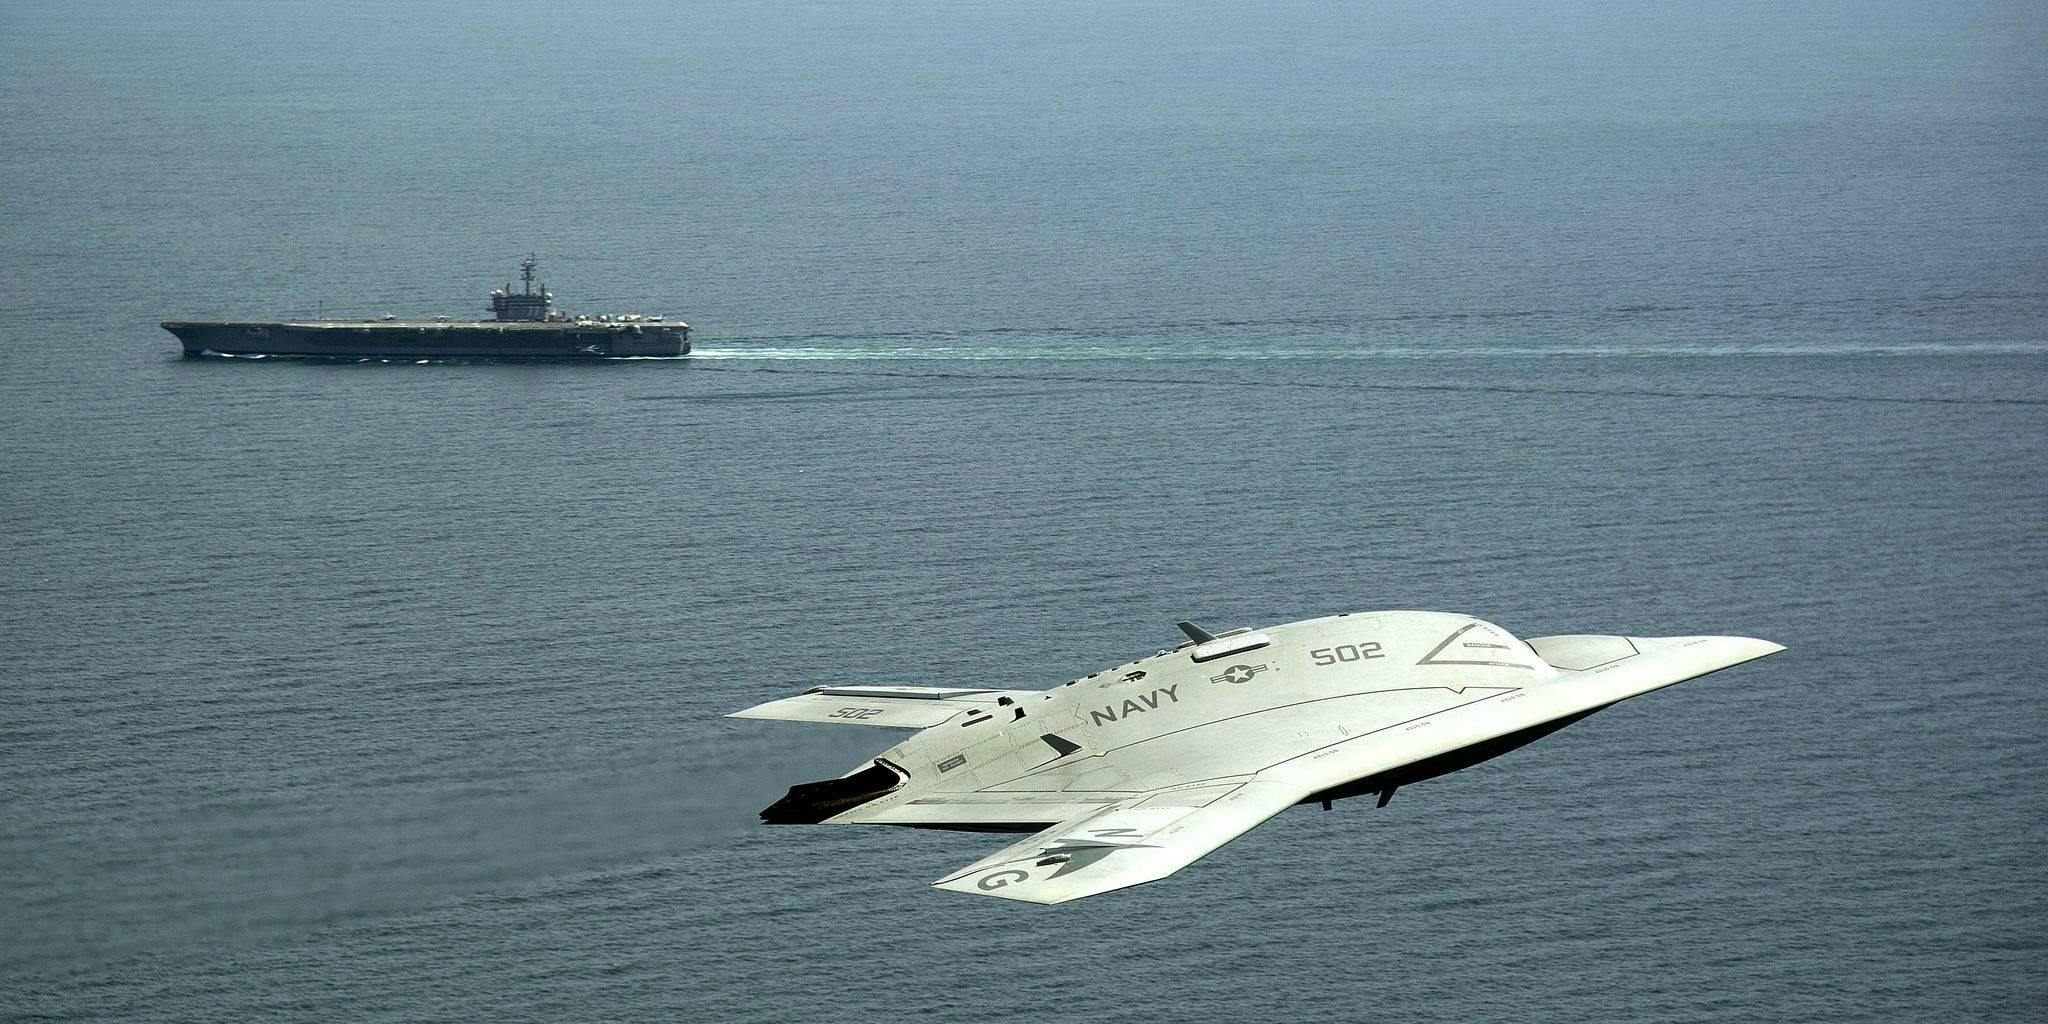 Here S The Navy S Sleek New Stealth Fighter Drone In Action